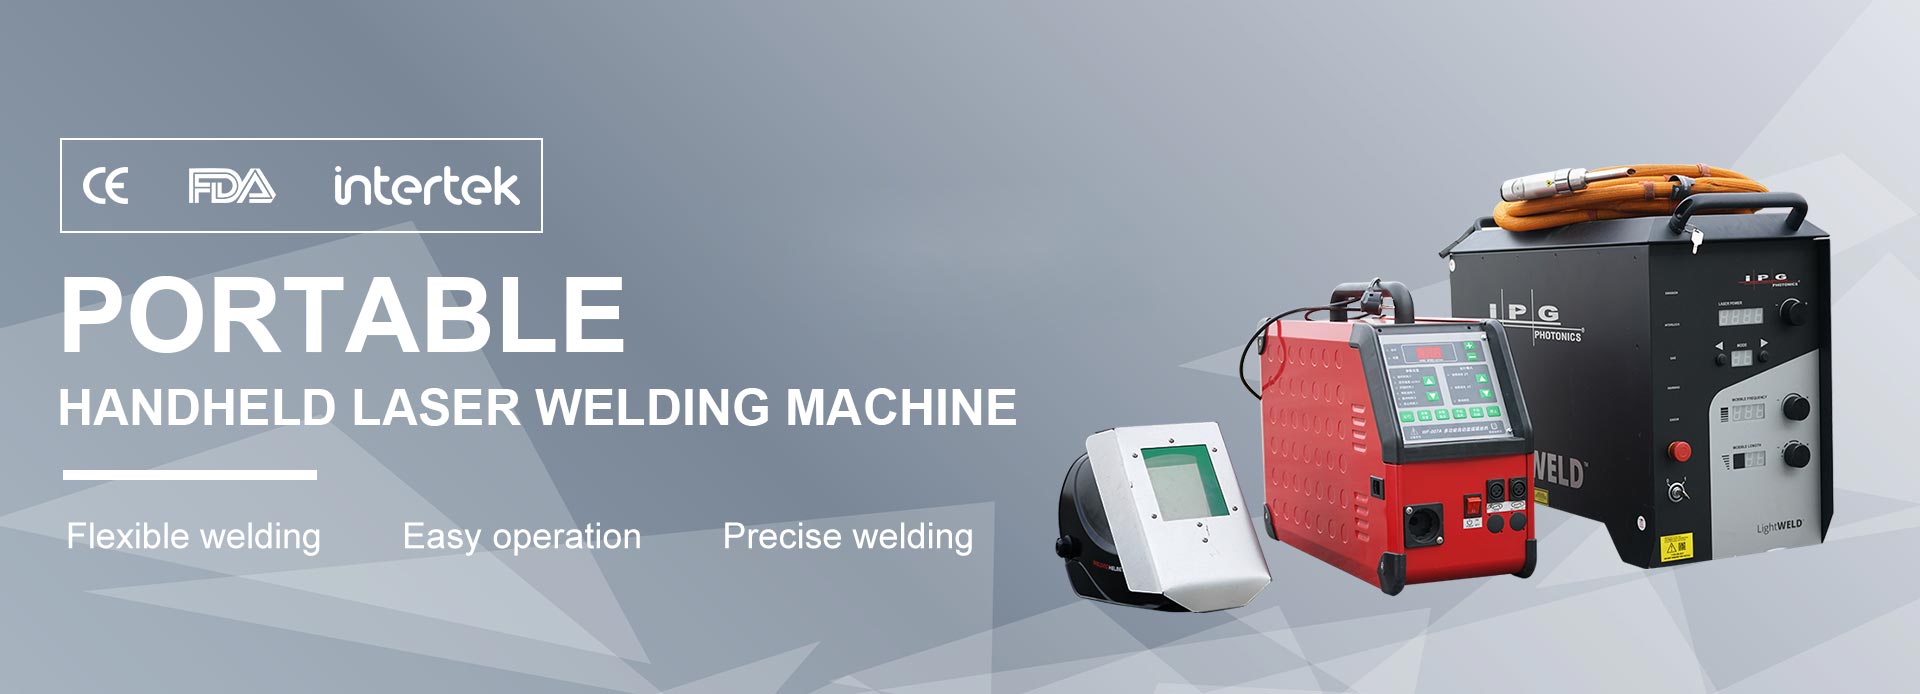 LXW-1000/1500W Mini Small Portable Fiber Laser Welding Machine Price with Laser Course 1kw 1.5kw